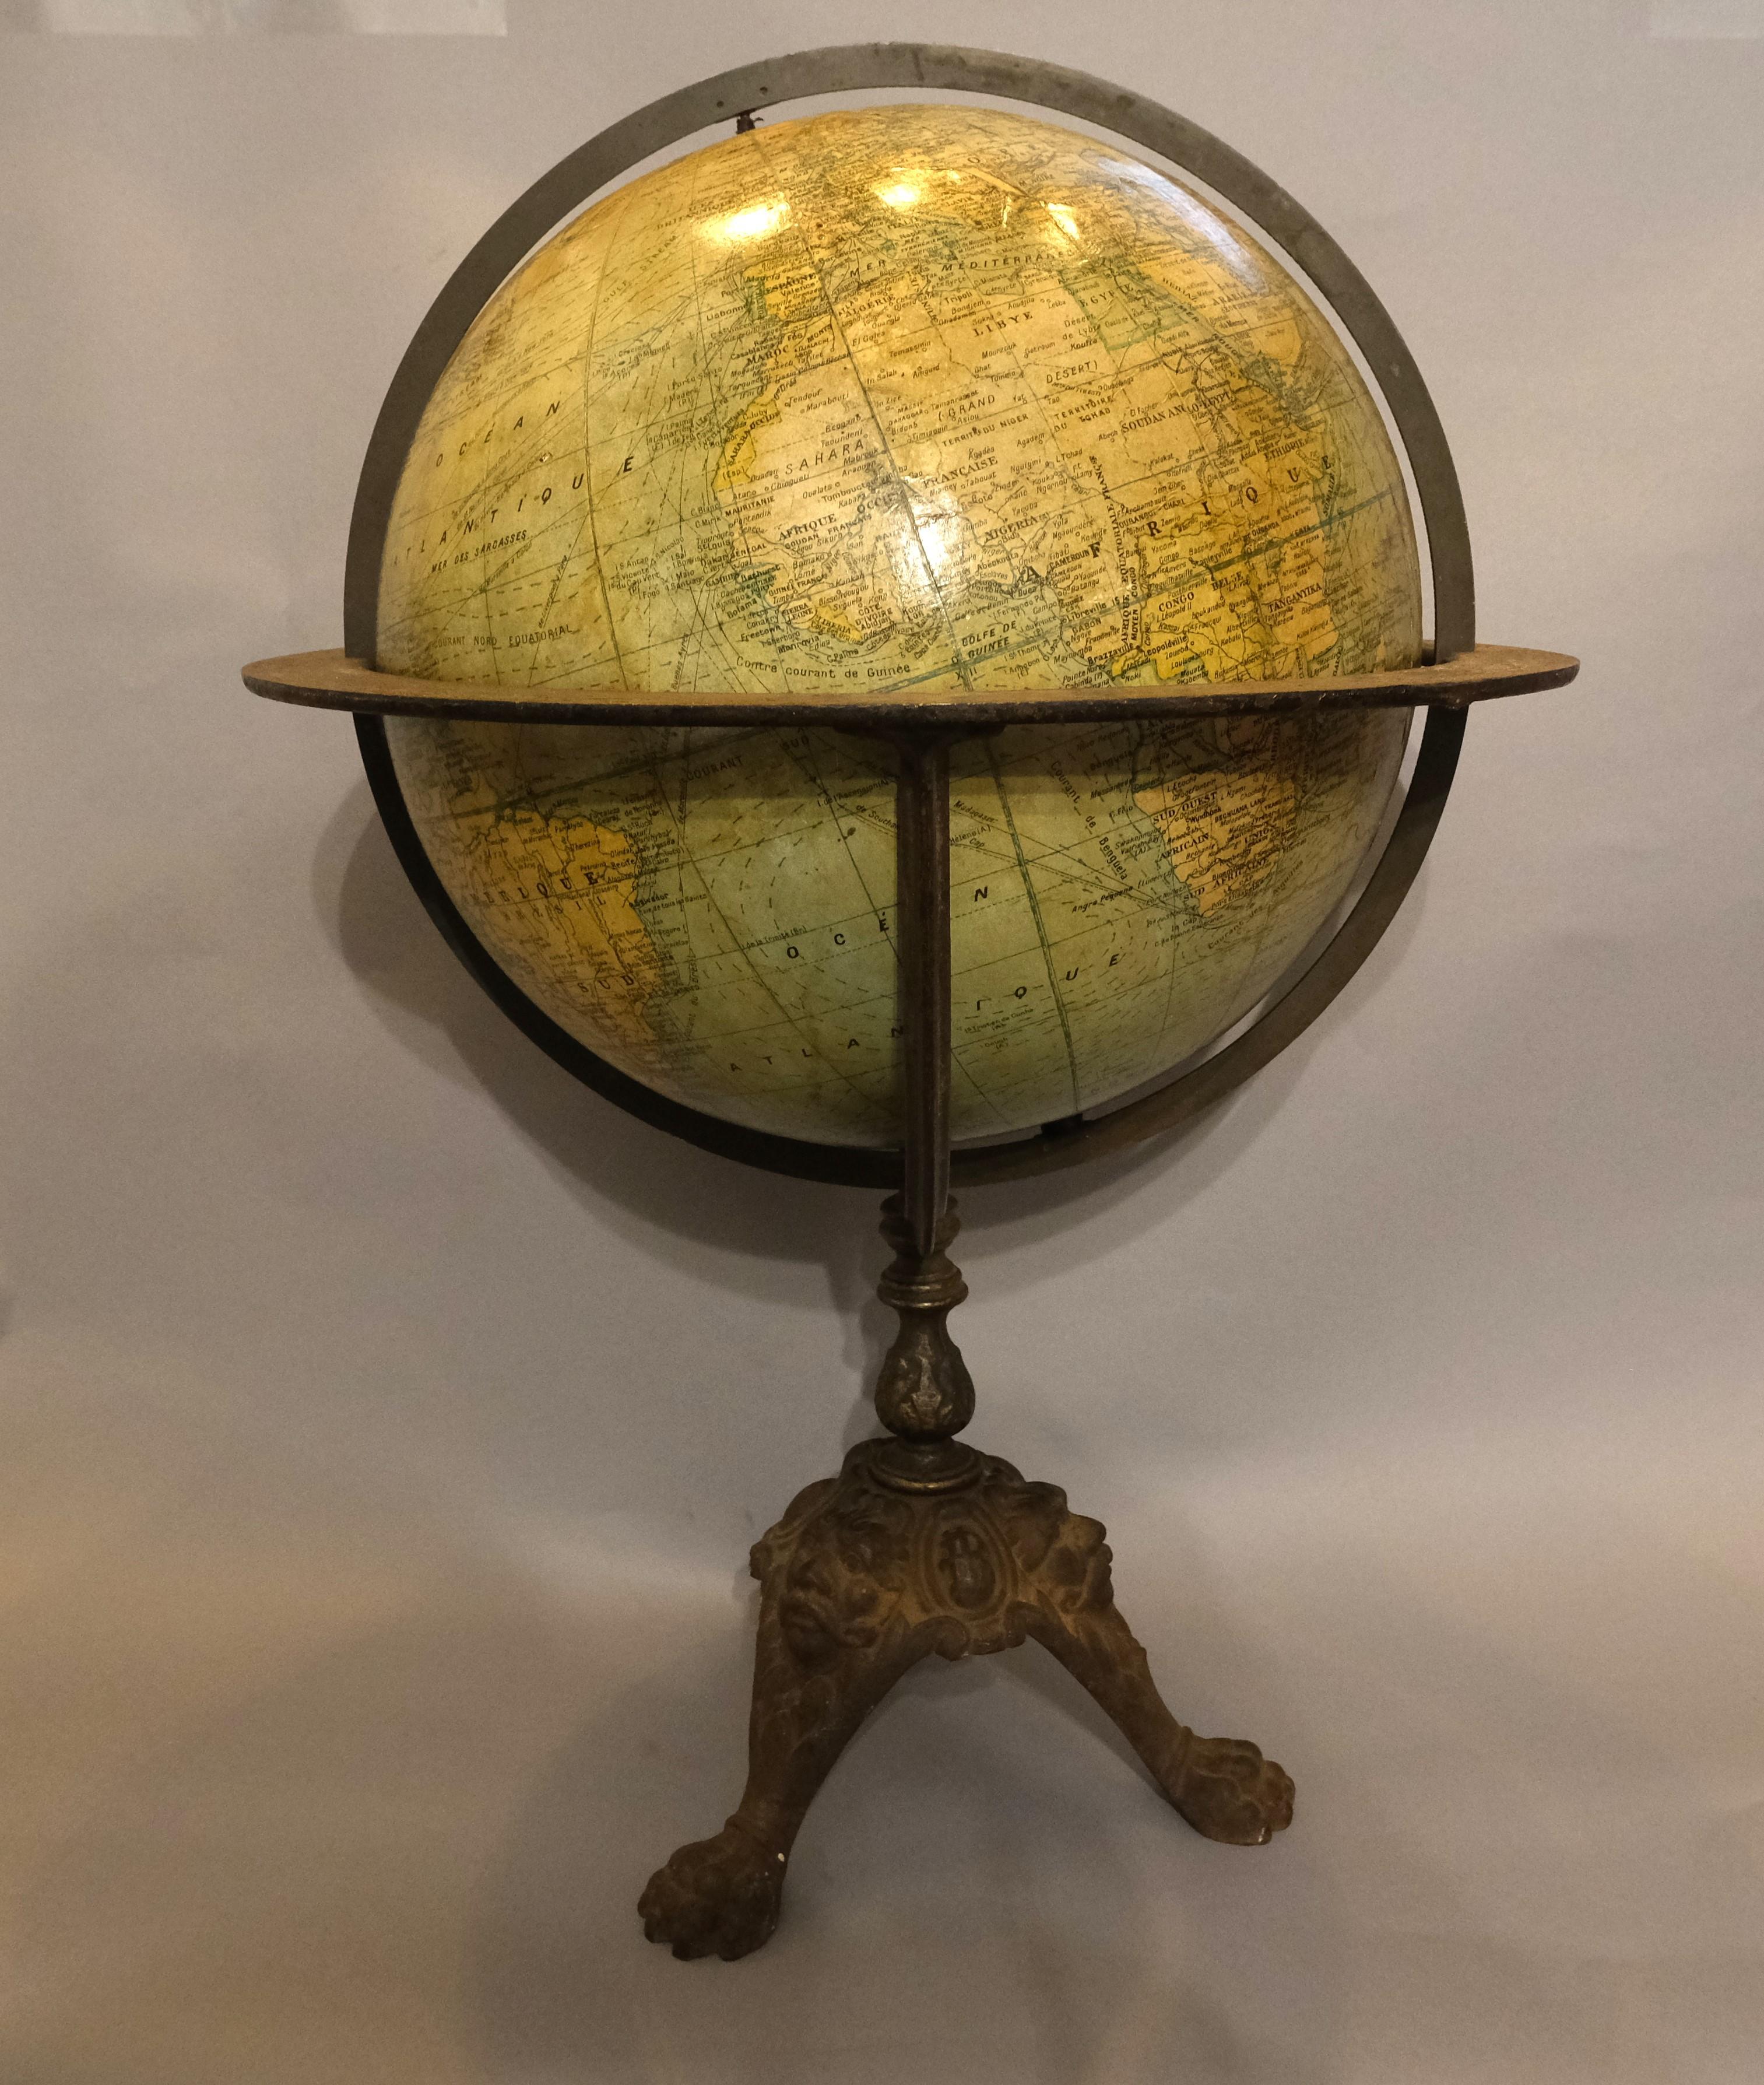 Hutton-Clarke Antiques is delighted to present a French globe dating back to circa 1900. This piece boasts a considerable size and stands on an elegant cast iron base, featuring paw feet and ornate heads on the cabriole legs. It is in fairly good